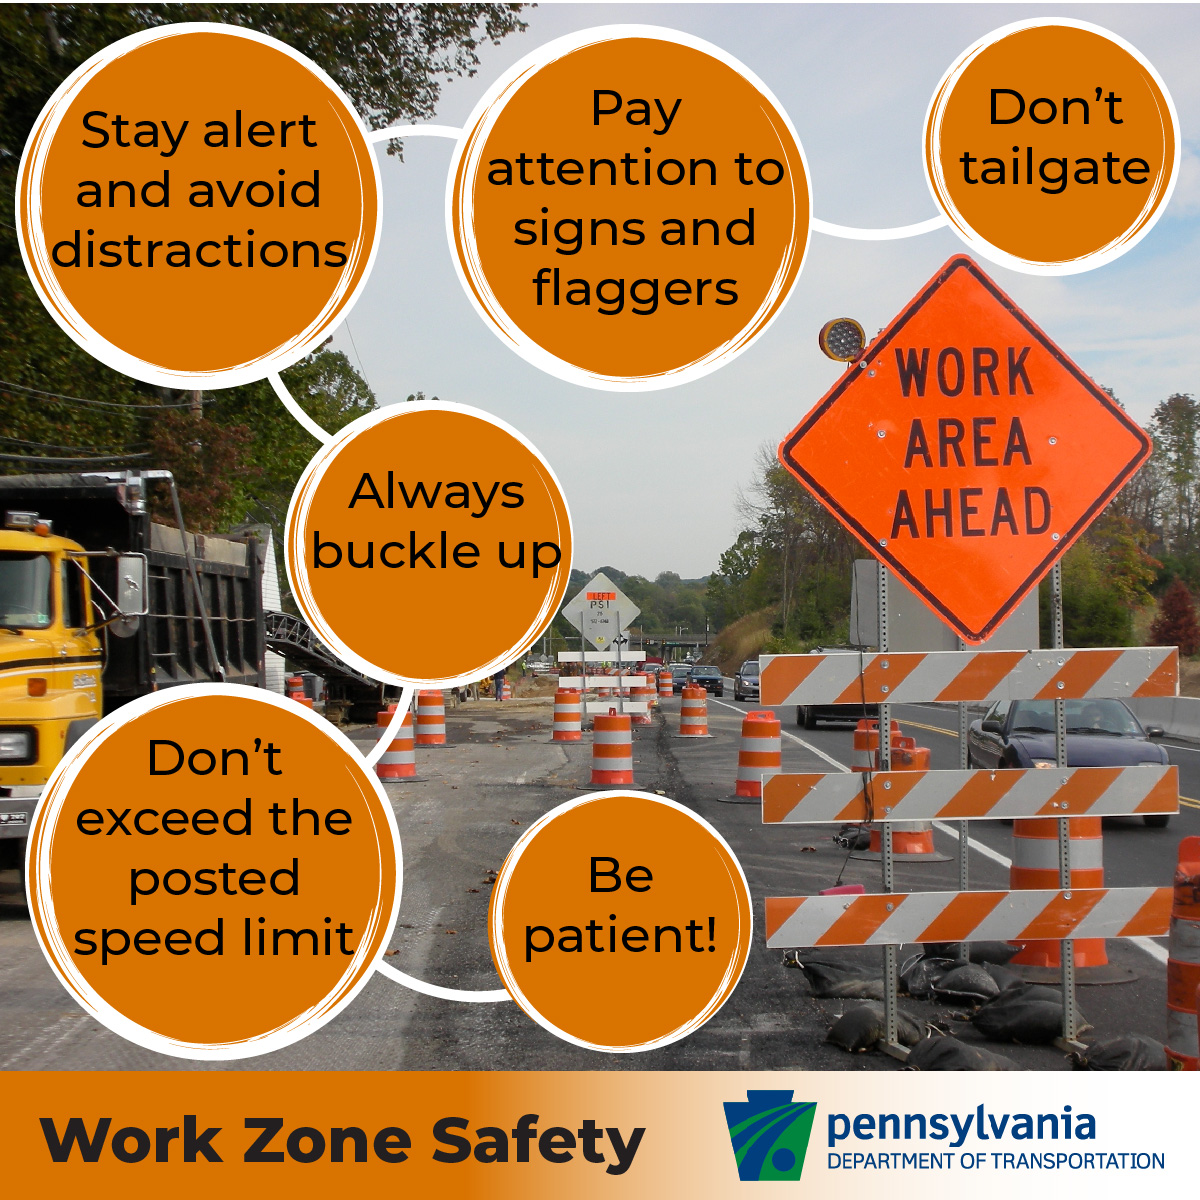 Roadway safety is everyone’s responsibility. Follow these tips to help keep work zones safe: ➡️ Follow posted speed limit ➡️ Avoid distractions ➡️ Watch for signs/flaggers ➡️ Keep safe distance from other vehicles More tips, info: penndot.pa.gov/workzonesafety #NWZAW #WorkZoneSafety